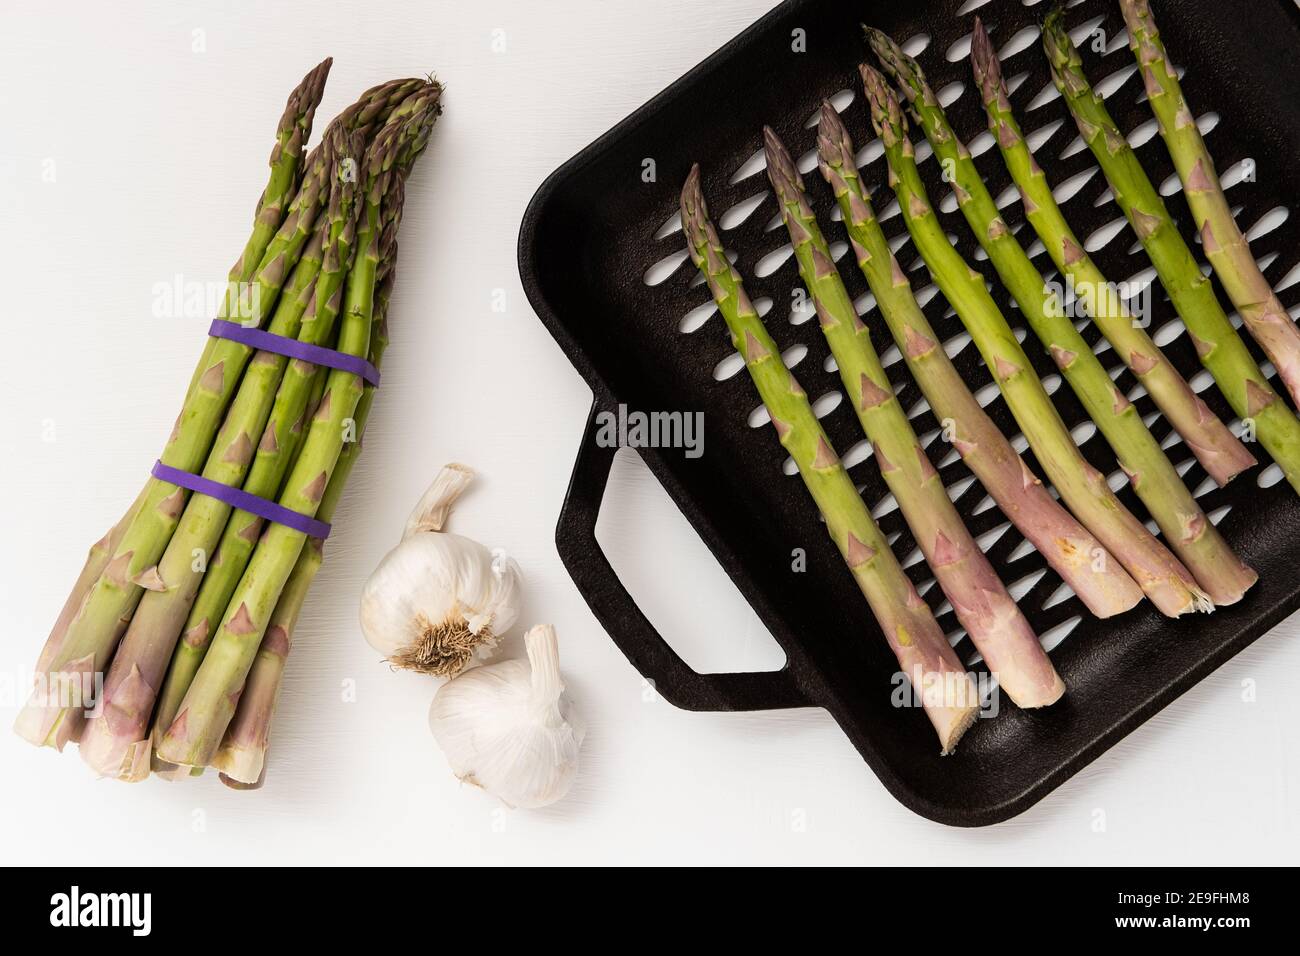 Asparagus and garlic being prepared for the grill on a white background Stock Photo